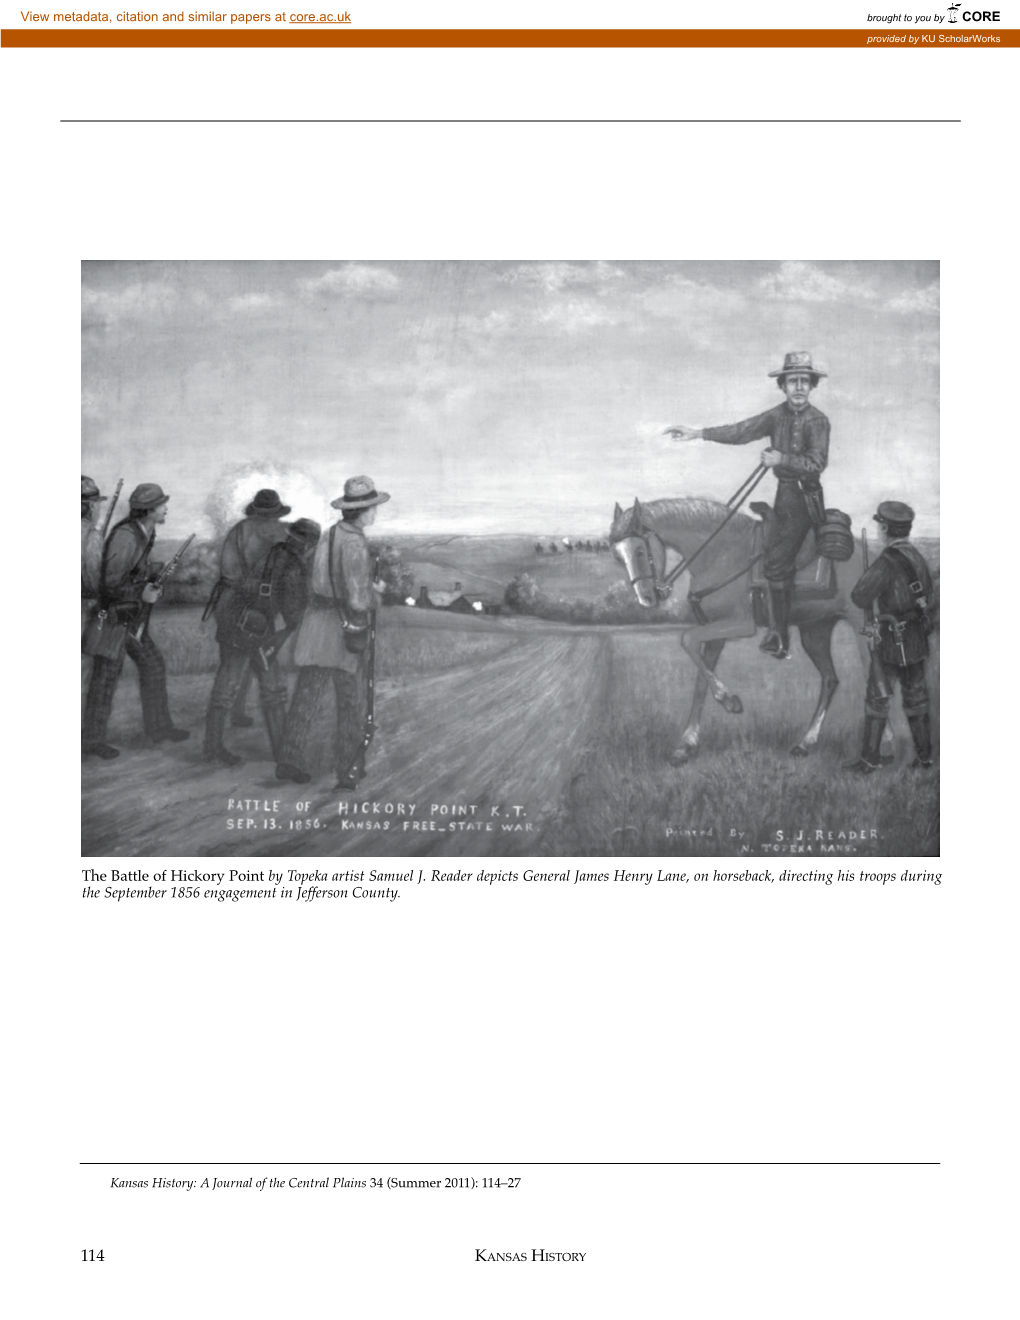 The Battle of Hickory Point by Topeka Artist Samuel J. Reader